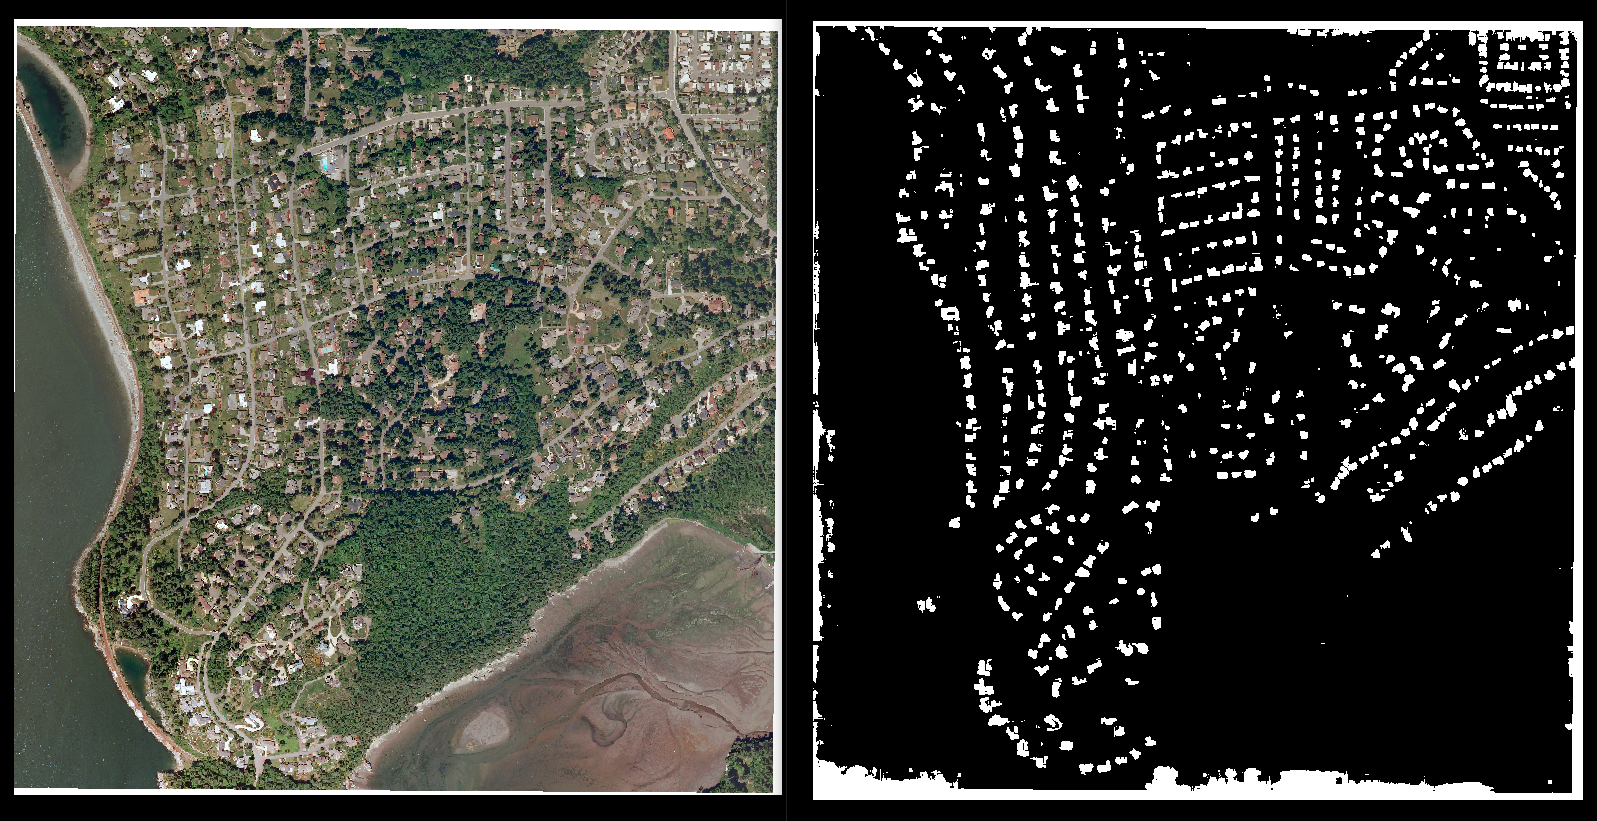 Building segmentations produced by a U-Net model trained on the Inria Aerial Image Labeling dataset